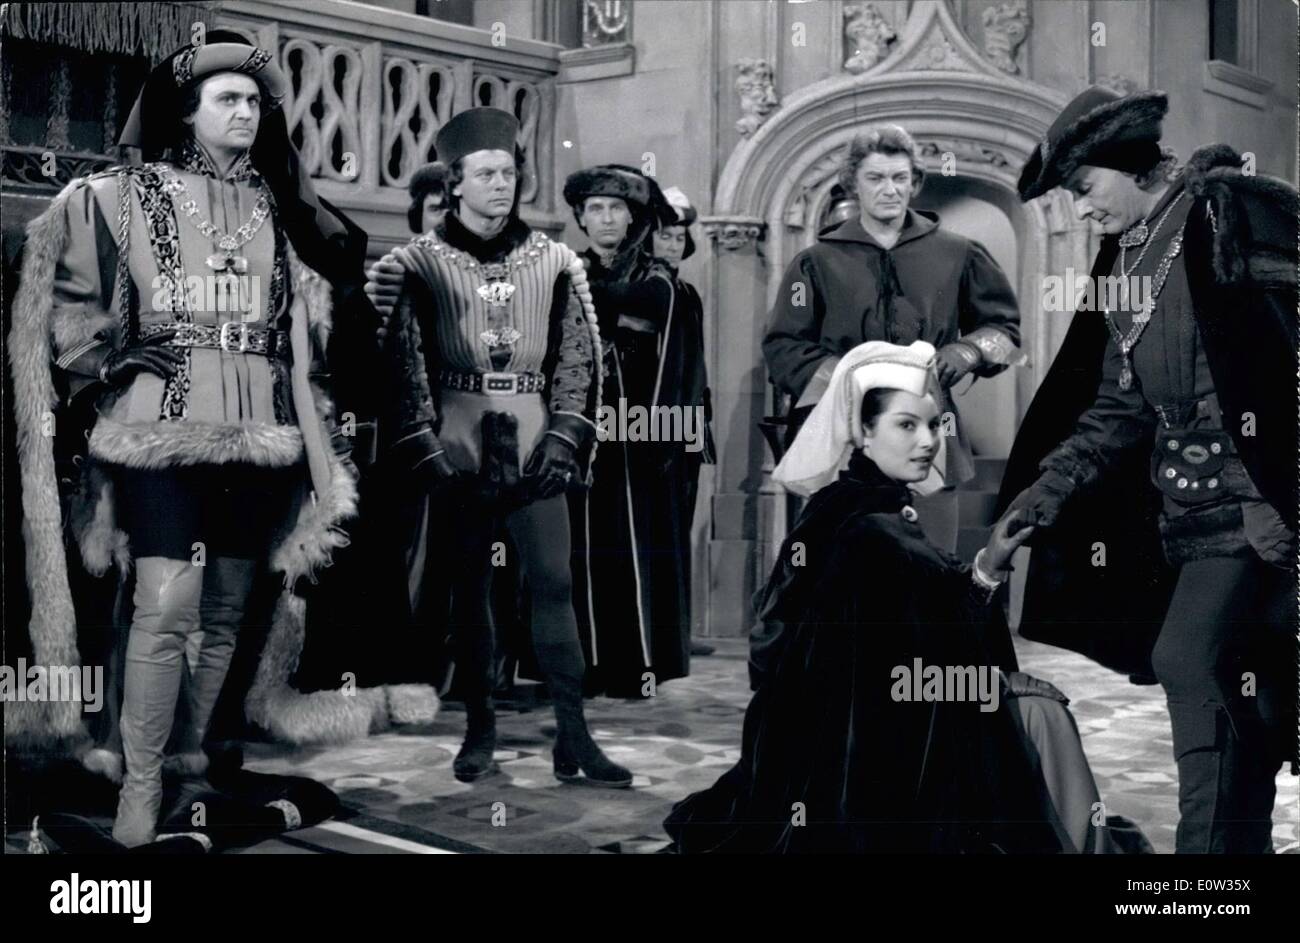 Mar. 03, 1961 - FILMING OF ''WOLVES MIRACLE'' RESUMED IN PARIS STUDIO MINUS THEIR PACK OF WOLVES THE FILMING OF ''MIRACLE DES LOUPS'' (WOLVES MIRACLE) WAS RESUMED IN A PARIS STUDIO TO-DAY. THE FILM REVIVES A ROMANTICE EPISODE OF THE STRUGGLE BETWEEN LOUIS XI AND CHARLES THE BOLD. JEAN--LOUIS BARRAULT WHO MAKES A SCREEN COMEBACK IMPERSONATES KING LOUIS XI. PARIS NEWSPAPERS REPORTED RECENTLY THE INCIDENT CREATED IN TGE DOUBS DEPARTMENT (WHERE OUTSIDE SCENES WERE FILMED) BY THE PRESENCE OF A PACK OF LIVE WOLVES BORROWED FROM A ZOO BY THE FILM DIRECTOR ANDRE HUNEBELLE Stock Photo